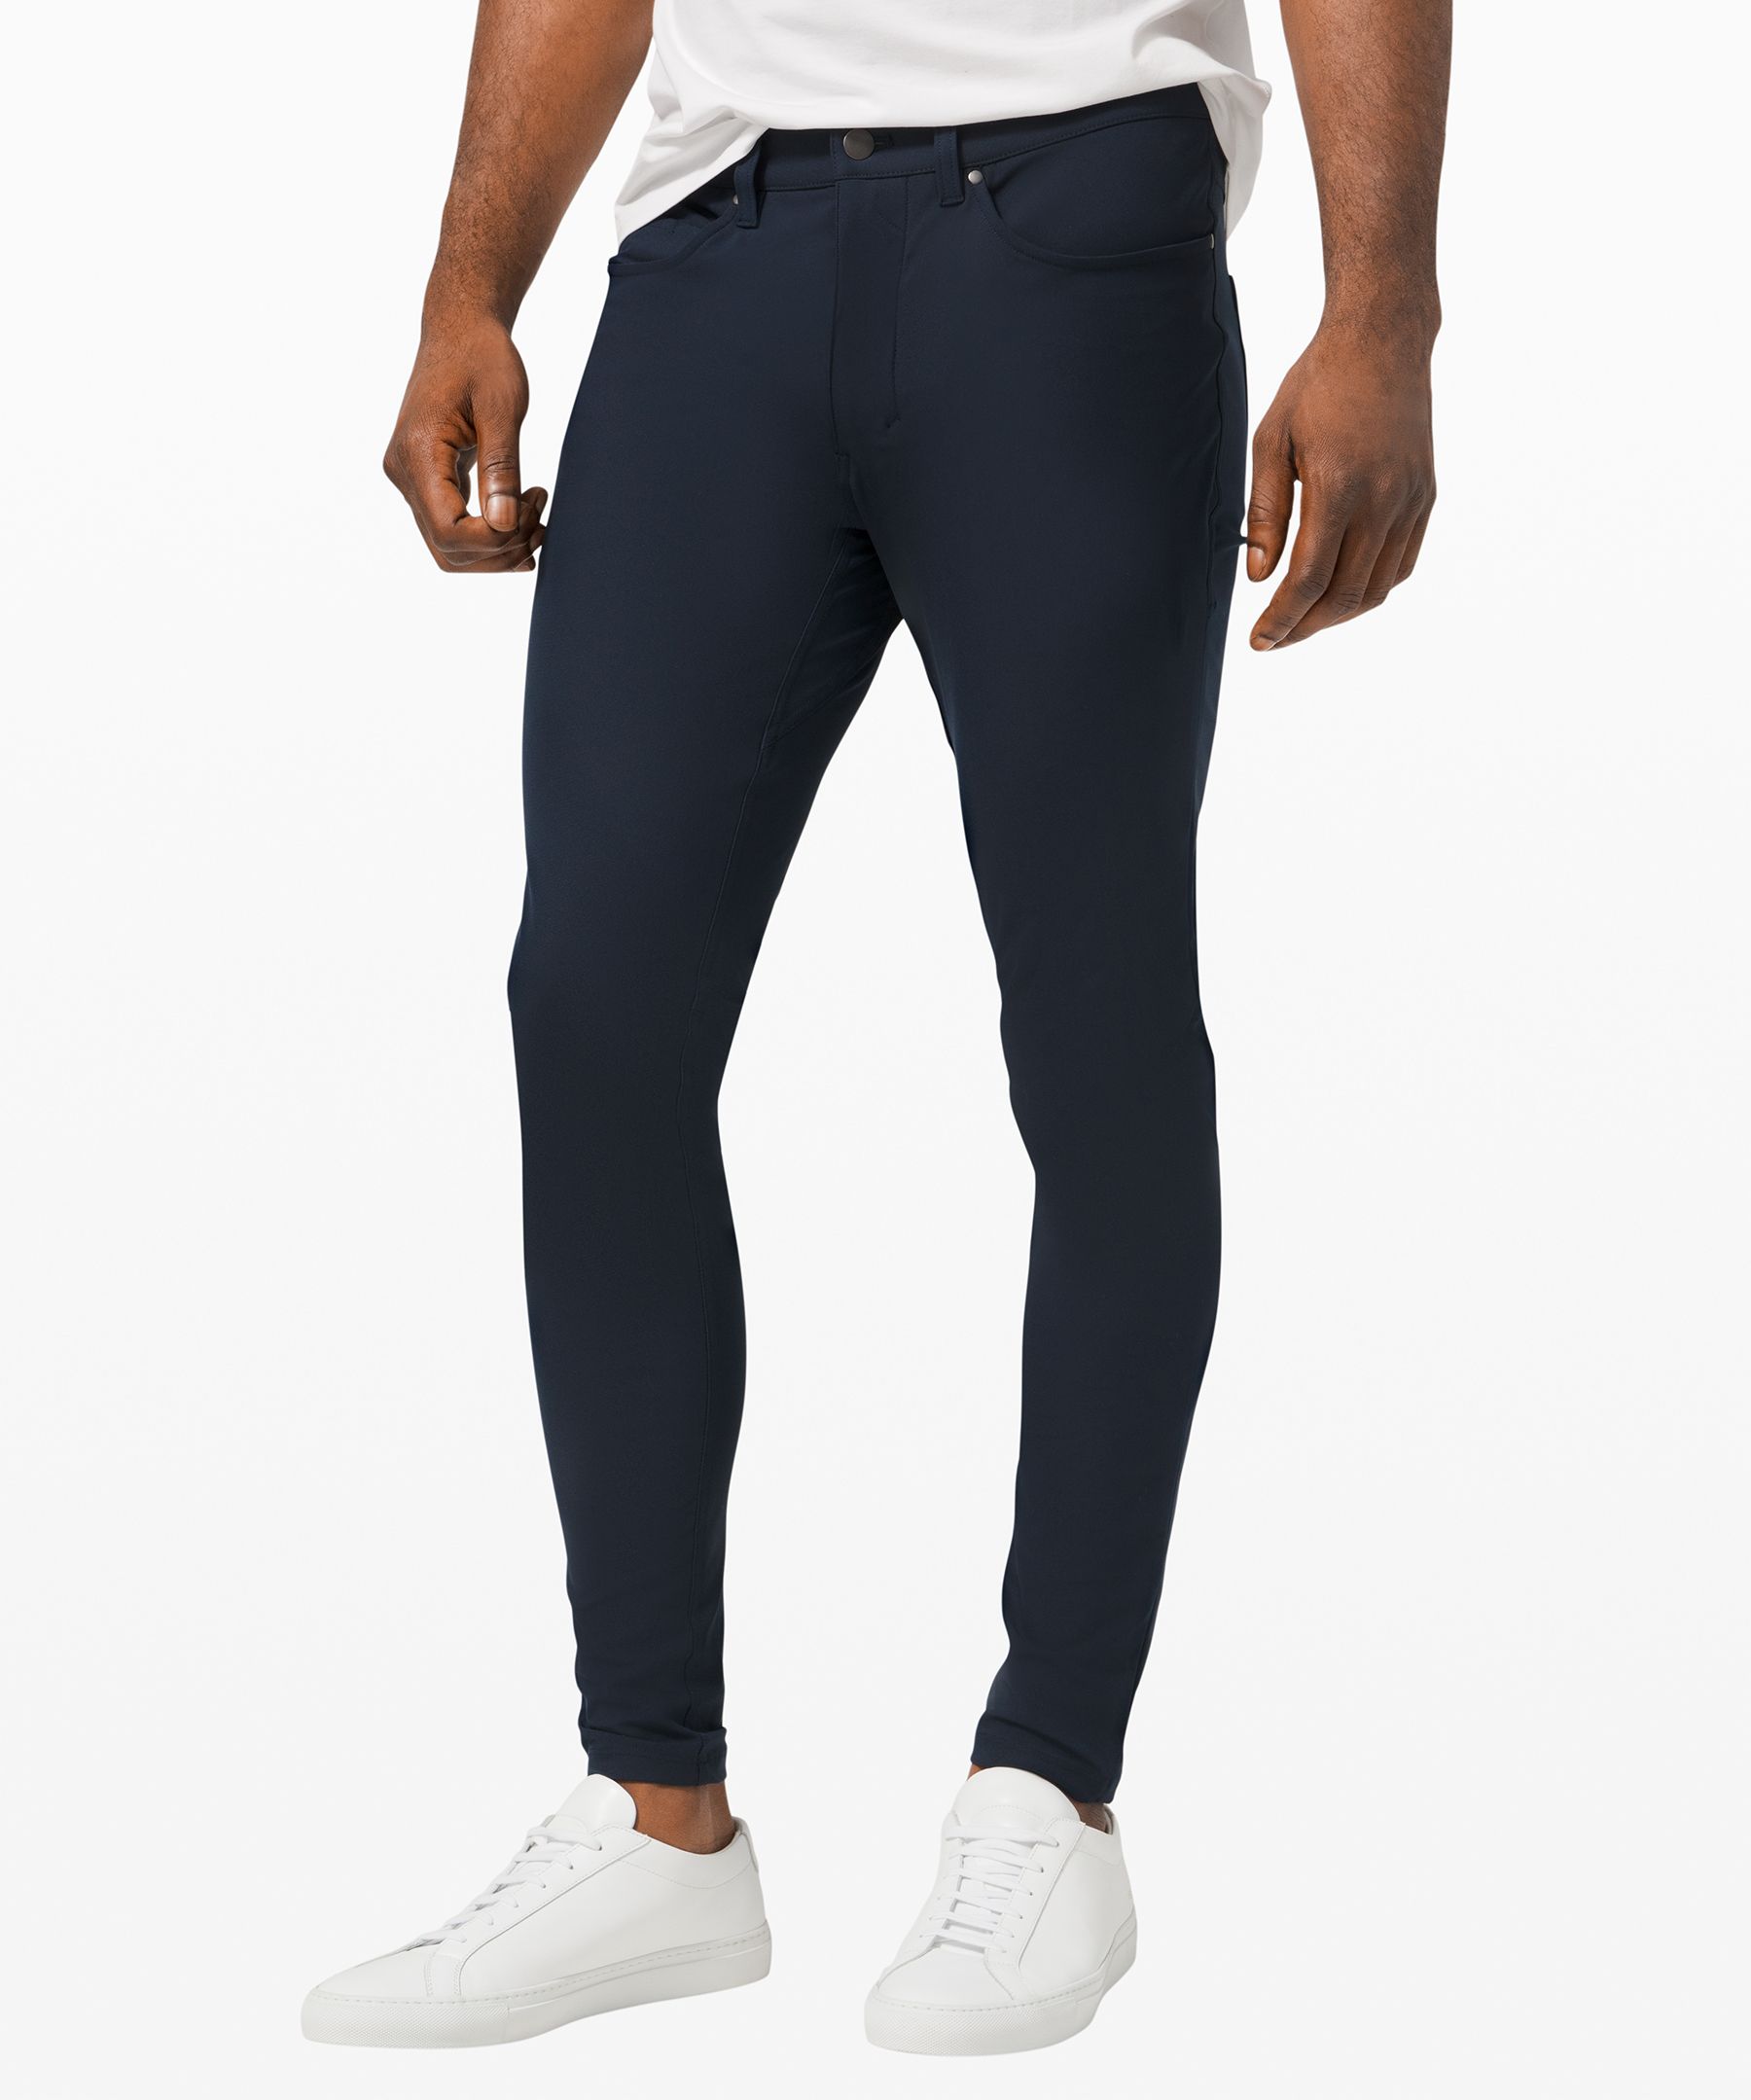 Lululemon Abc Skinny-fit Pants 32 Warpstreme In Trench